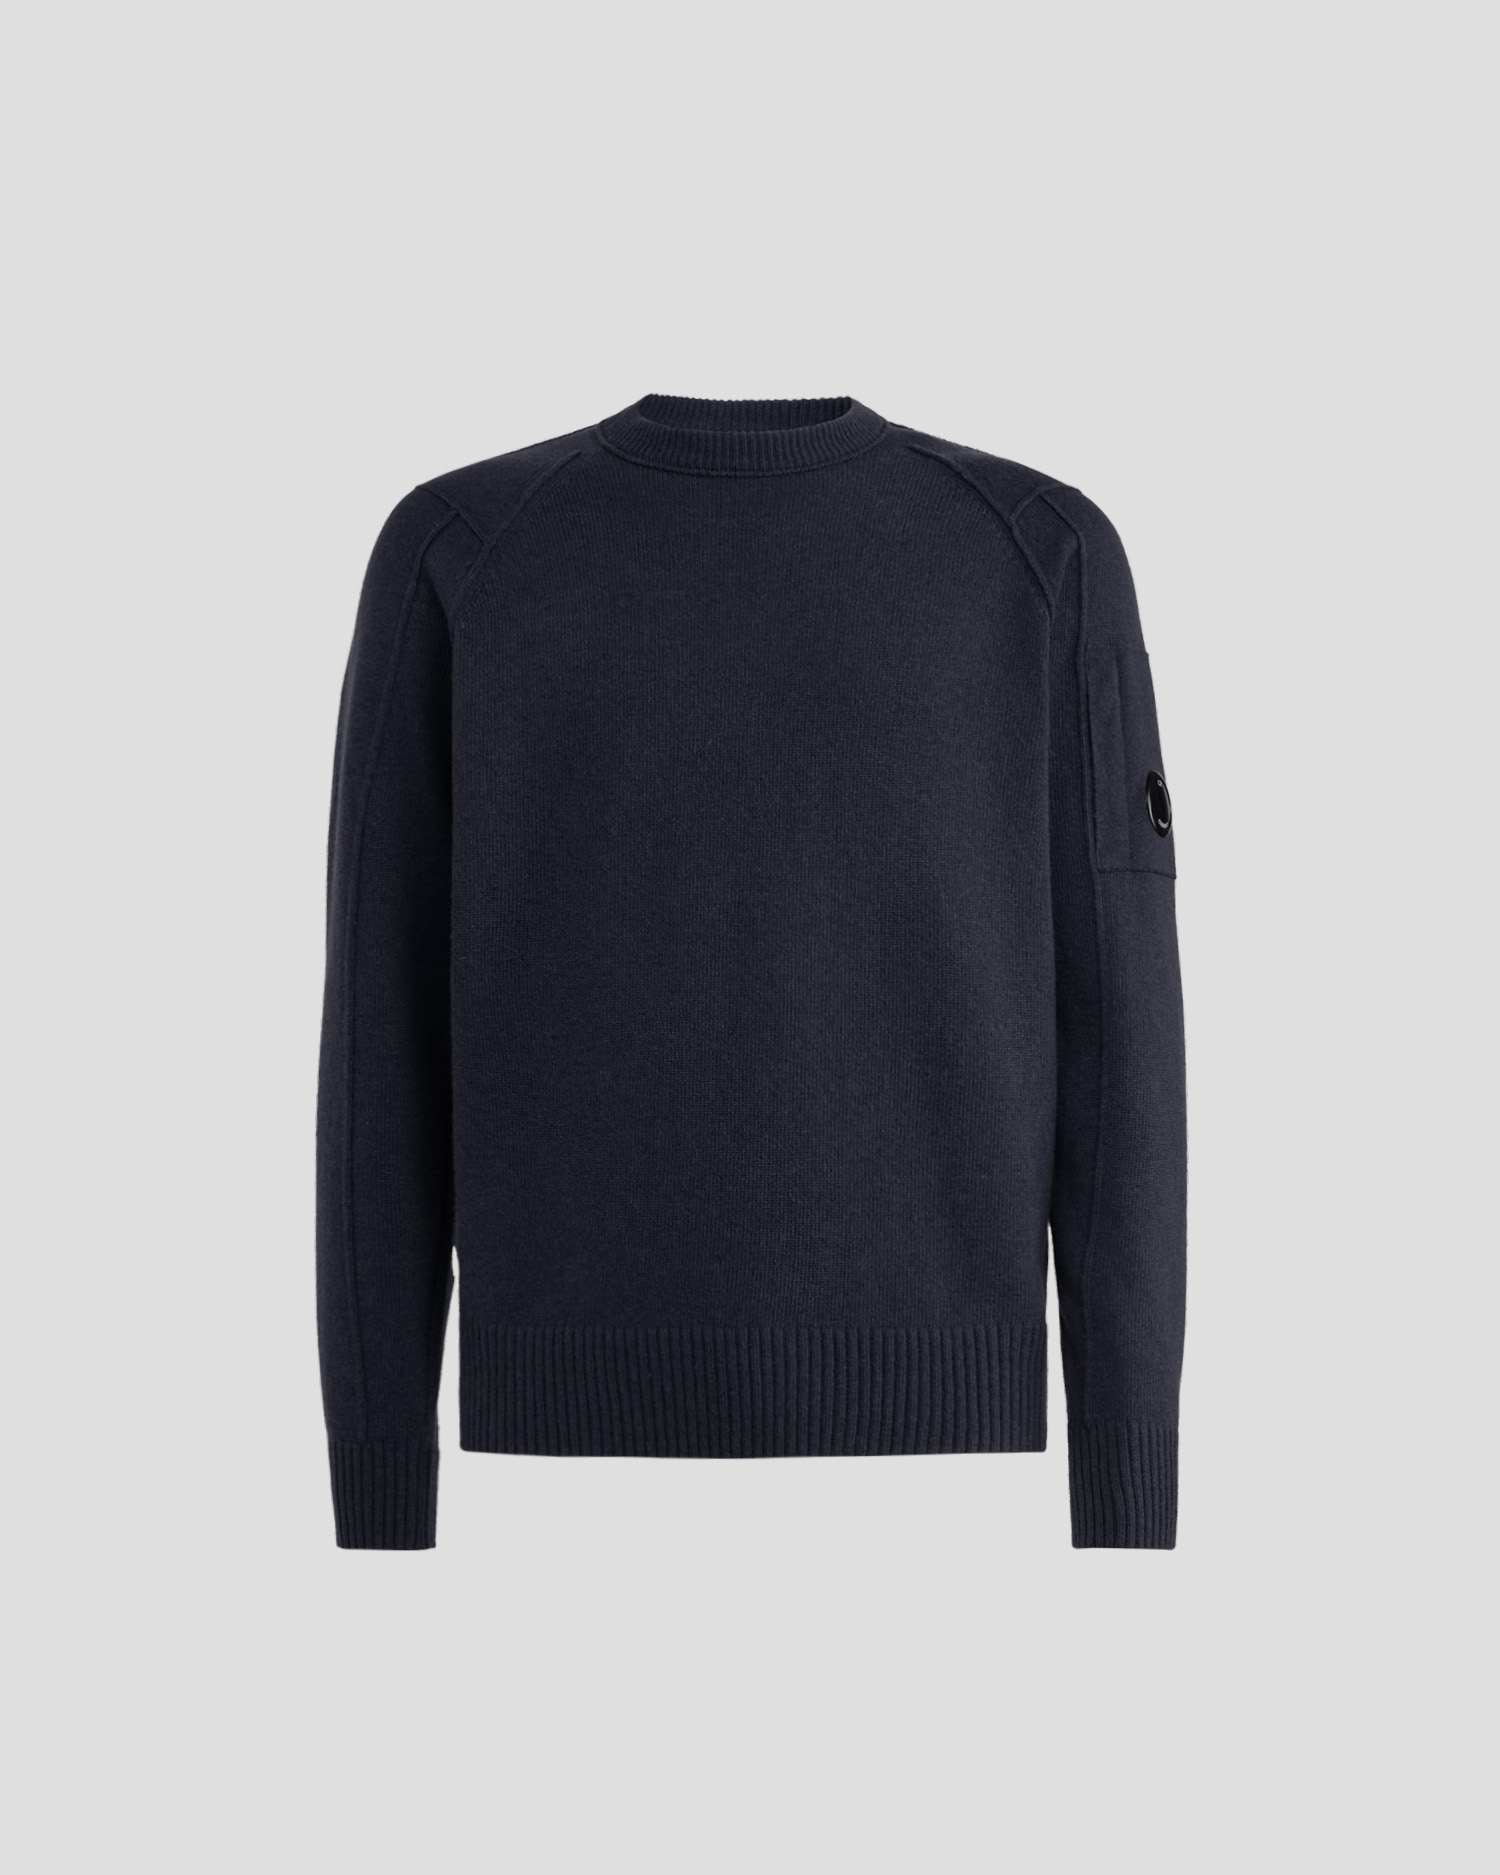 Lambswool Jumper | C.P. Company Online Store